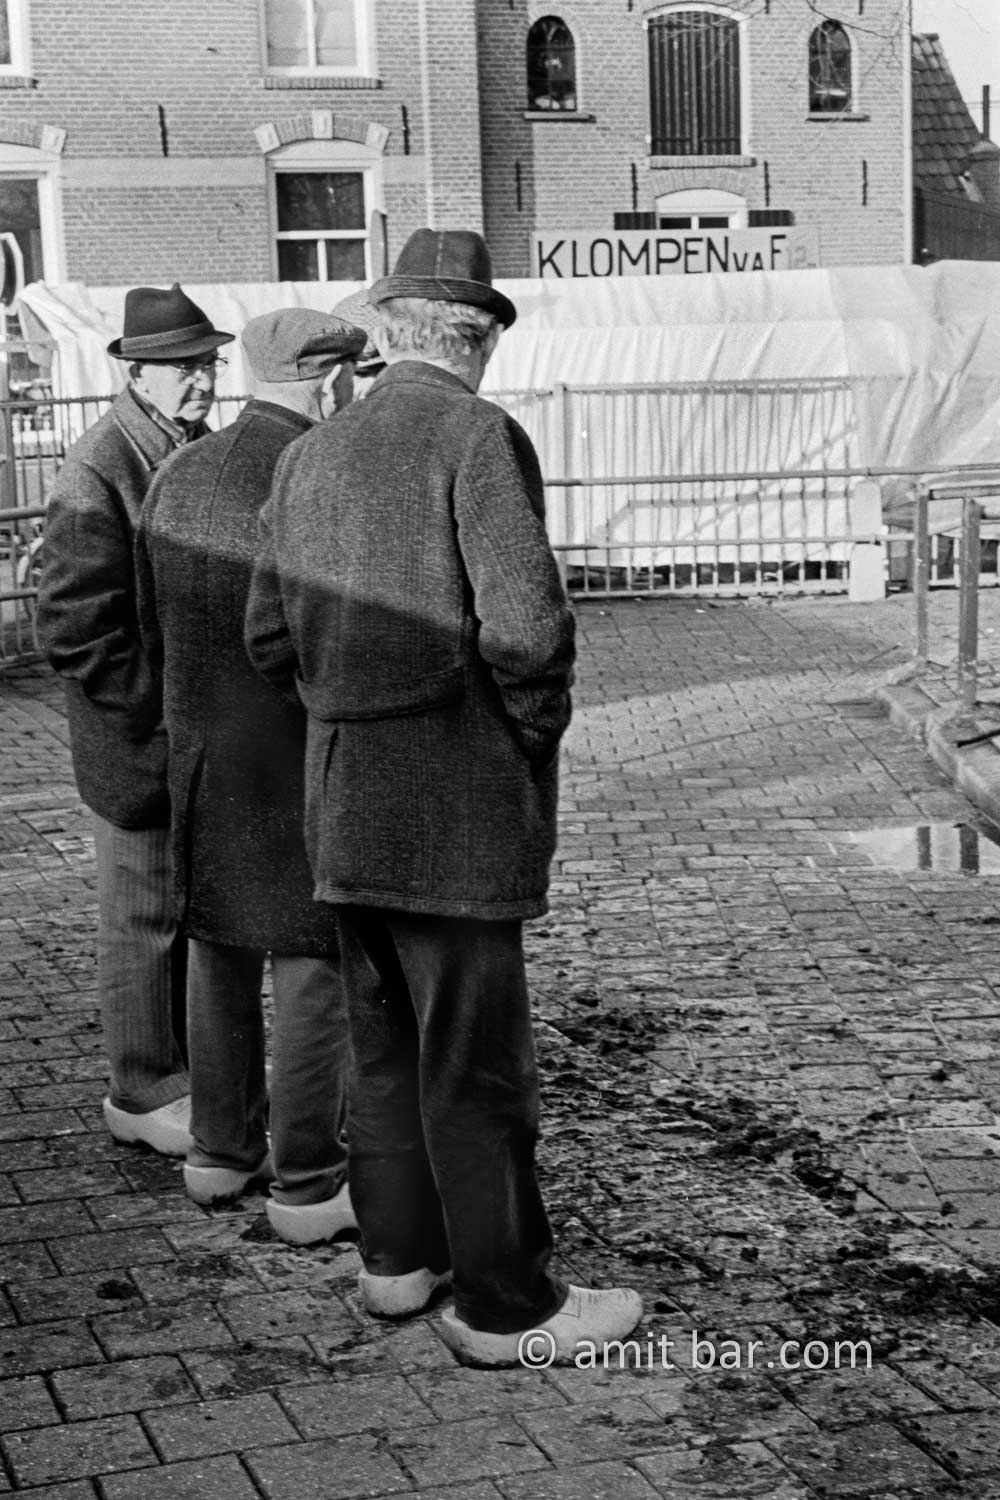 Clogs: Four farmers in discussion on the cattle-market in Doetinchem, The Netherlands